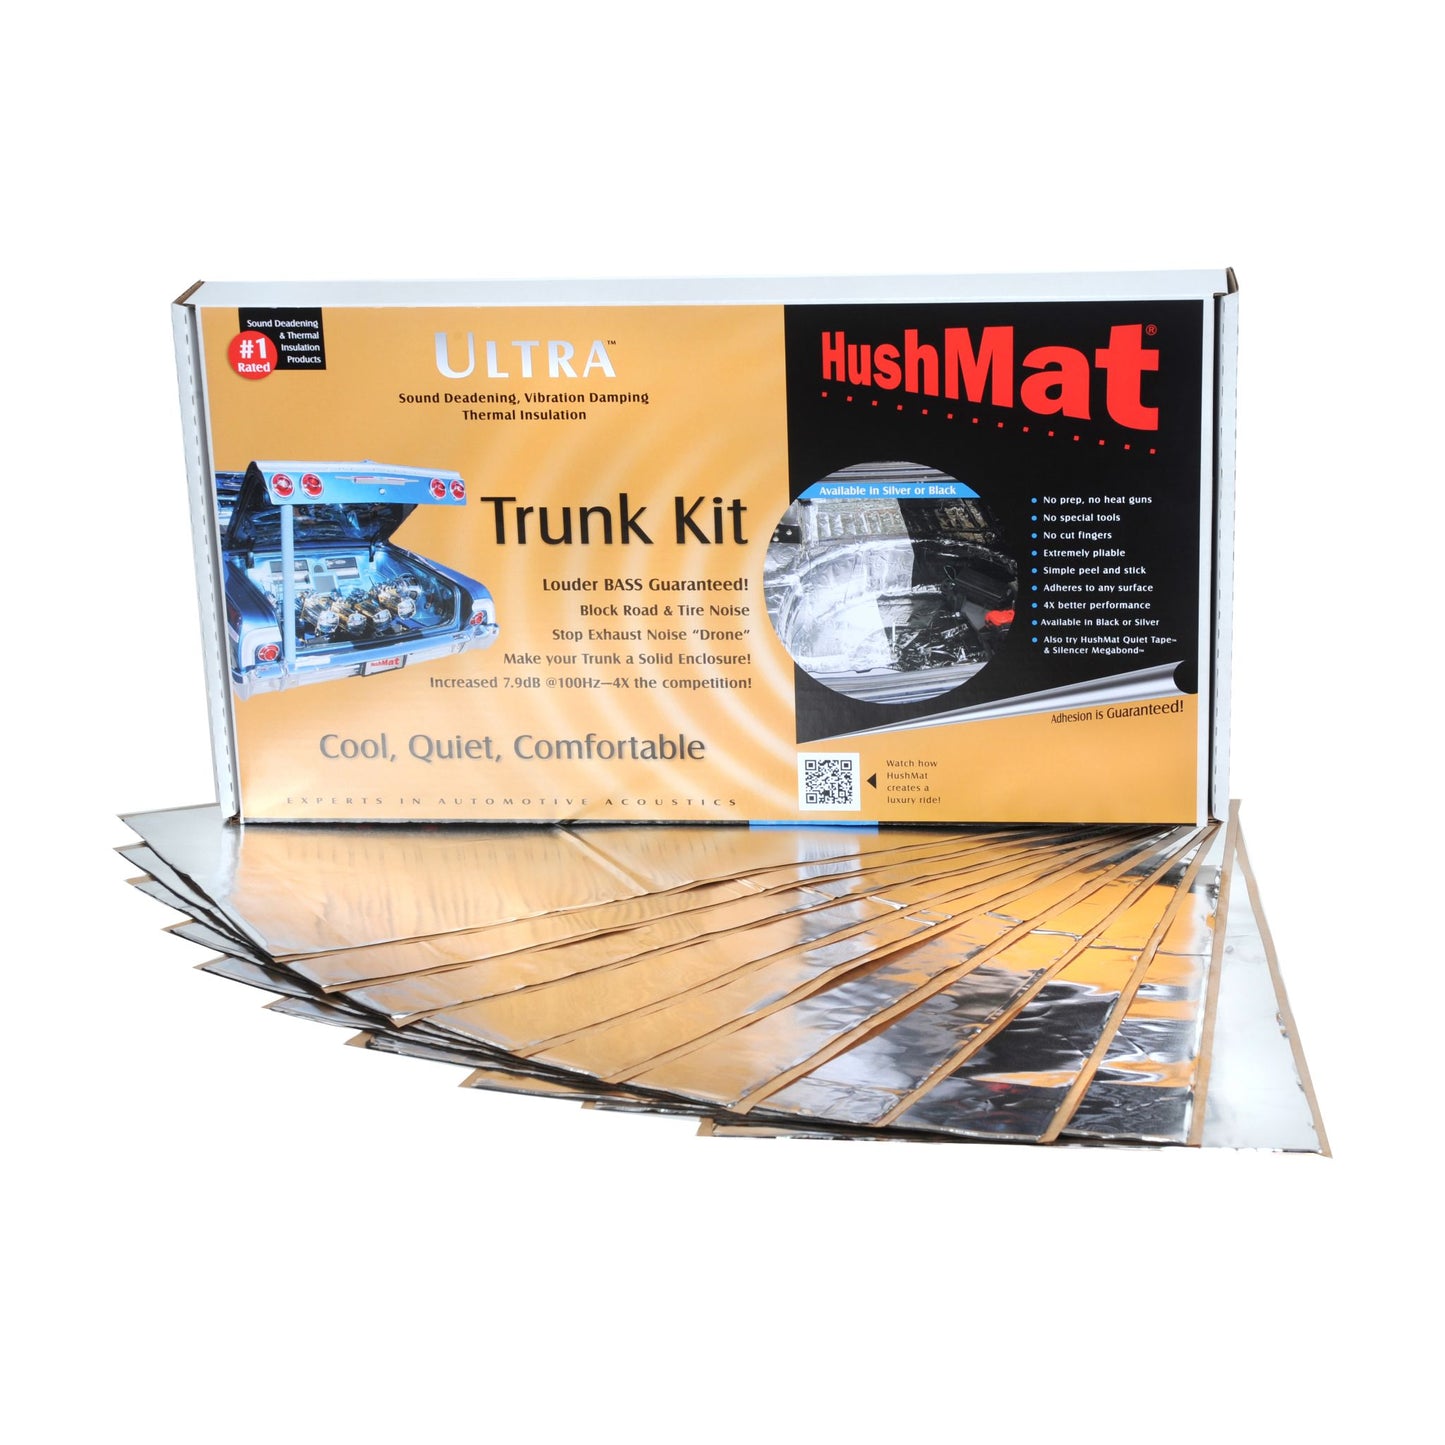 Hushmat Trunk Kit - Silver Foil with Self Adhesive Butyl-10 Sheets 12inx23in ea 19 sq ft 10301